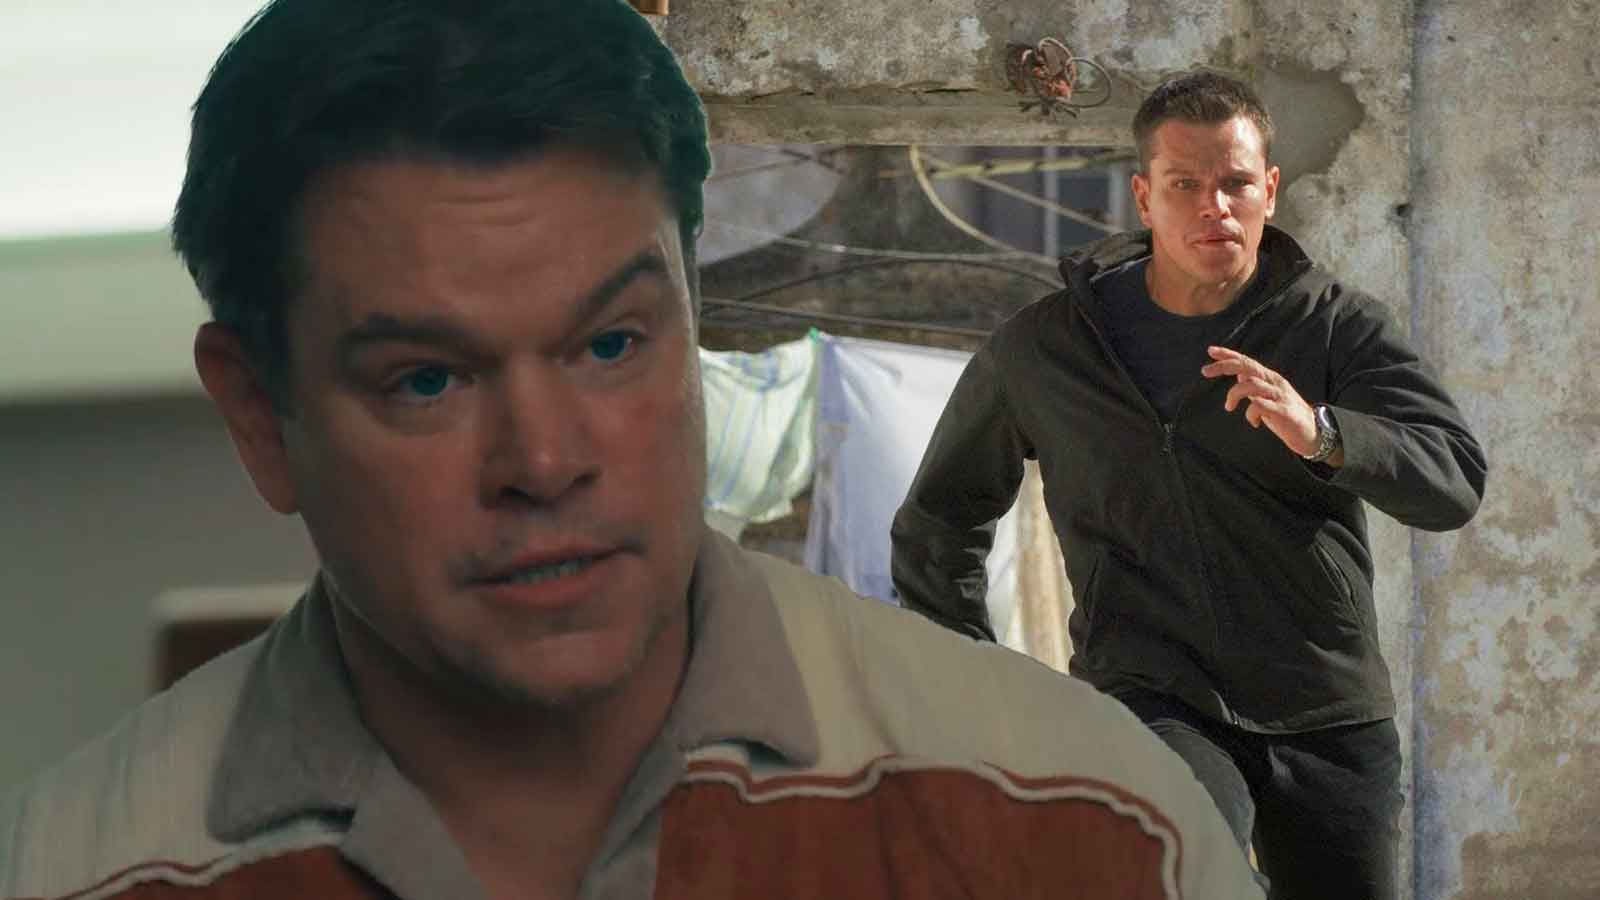 "I have an unspoken deal": Matt Damon Has Found a Way to Escape Paparazzies and It's Absolutely Genius